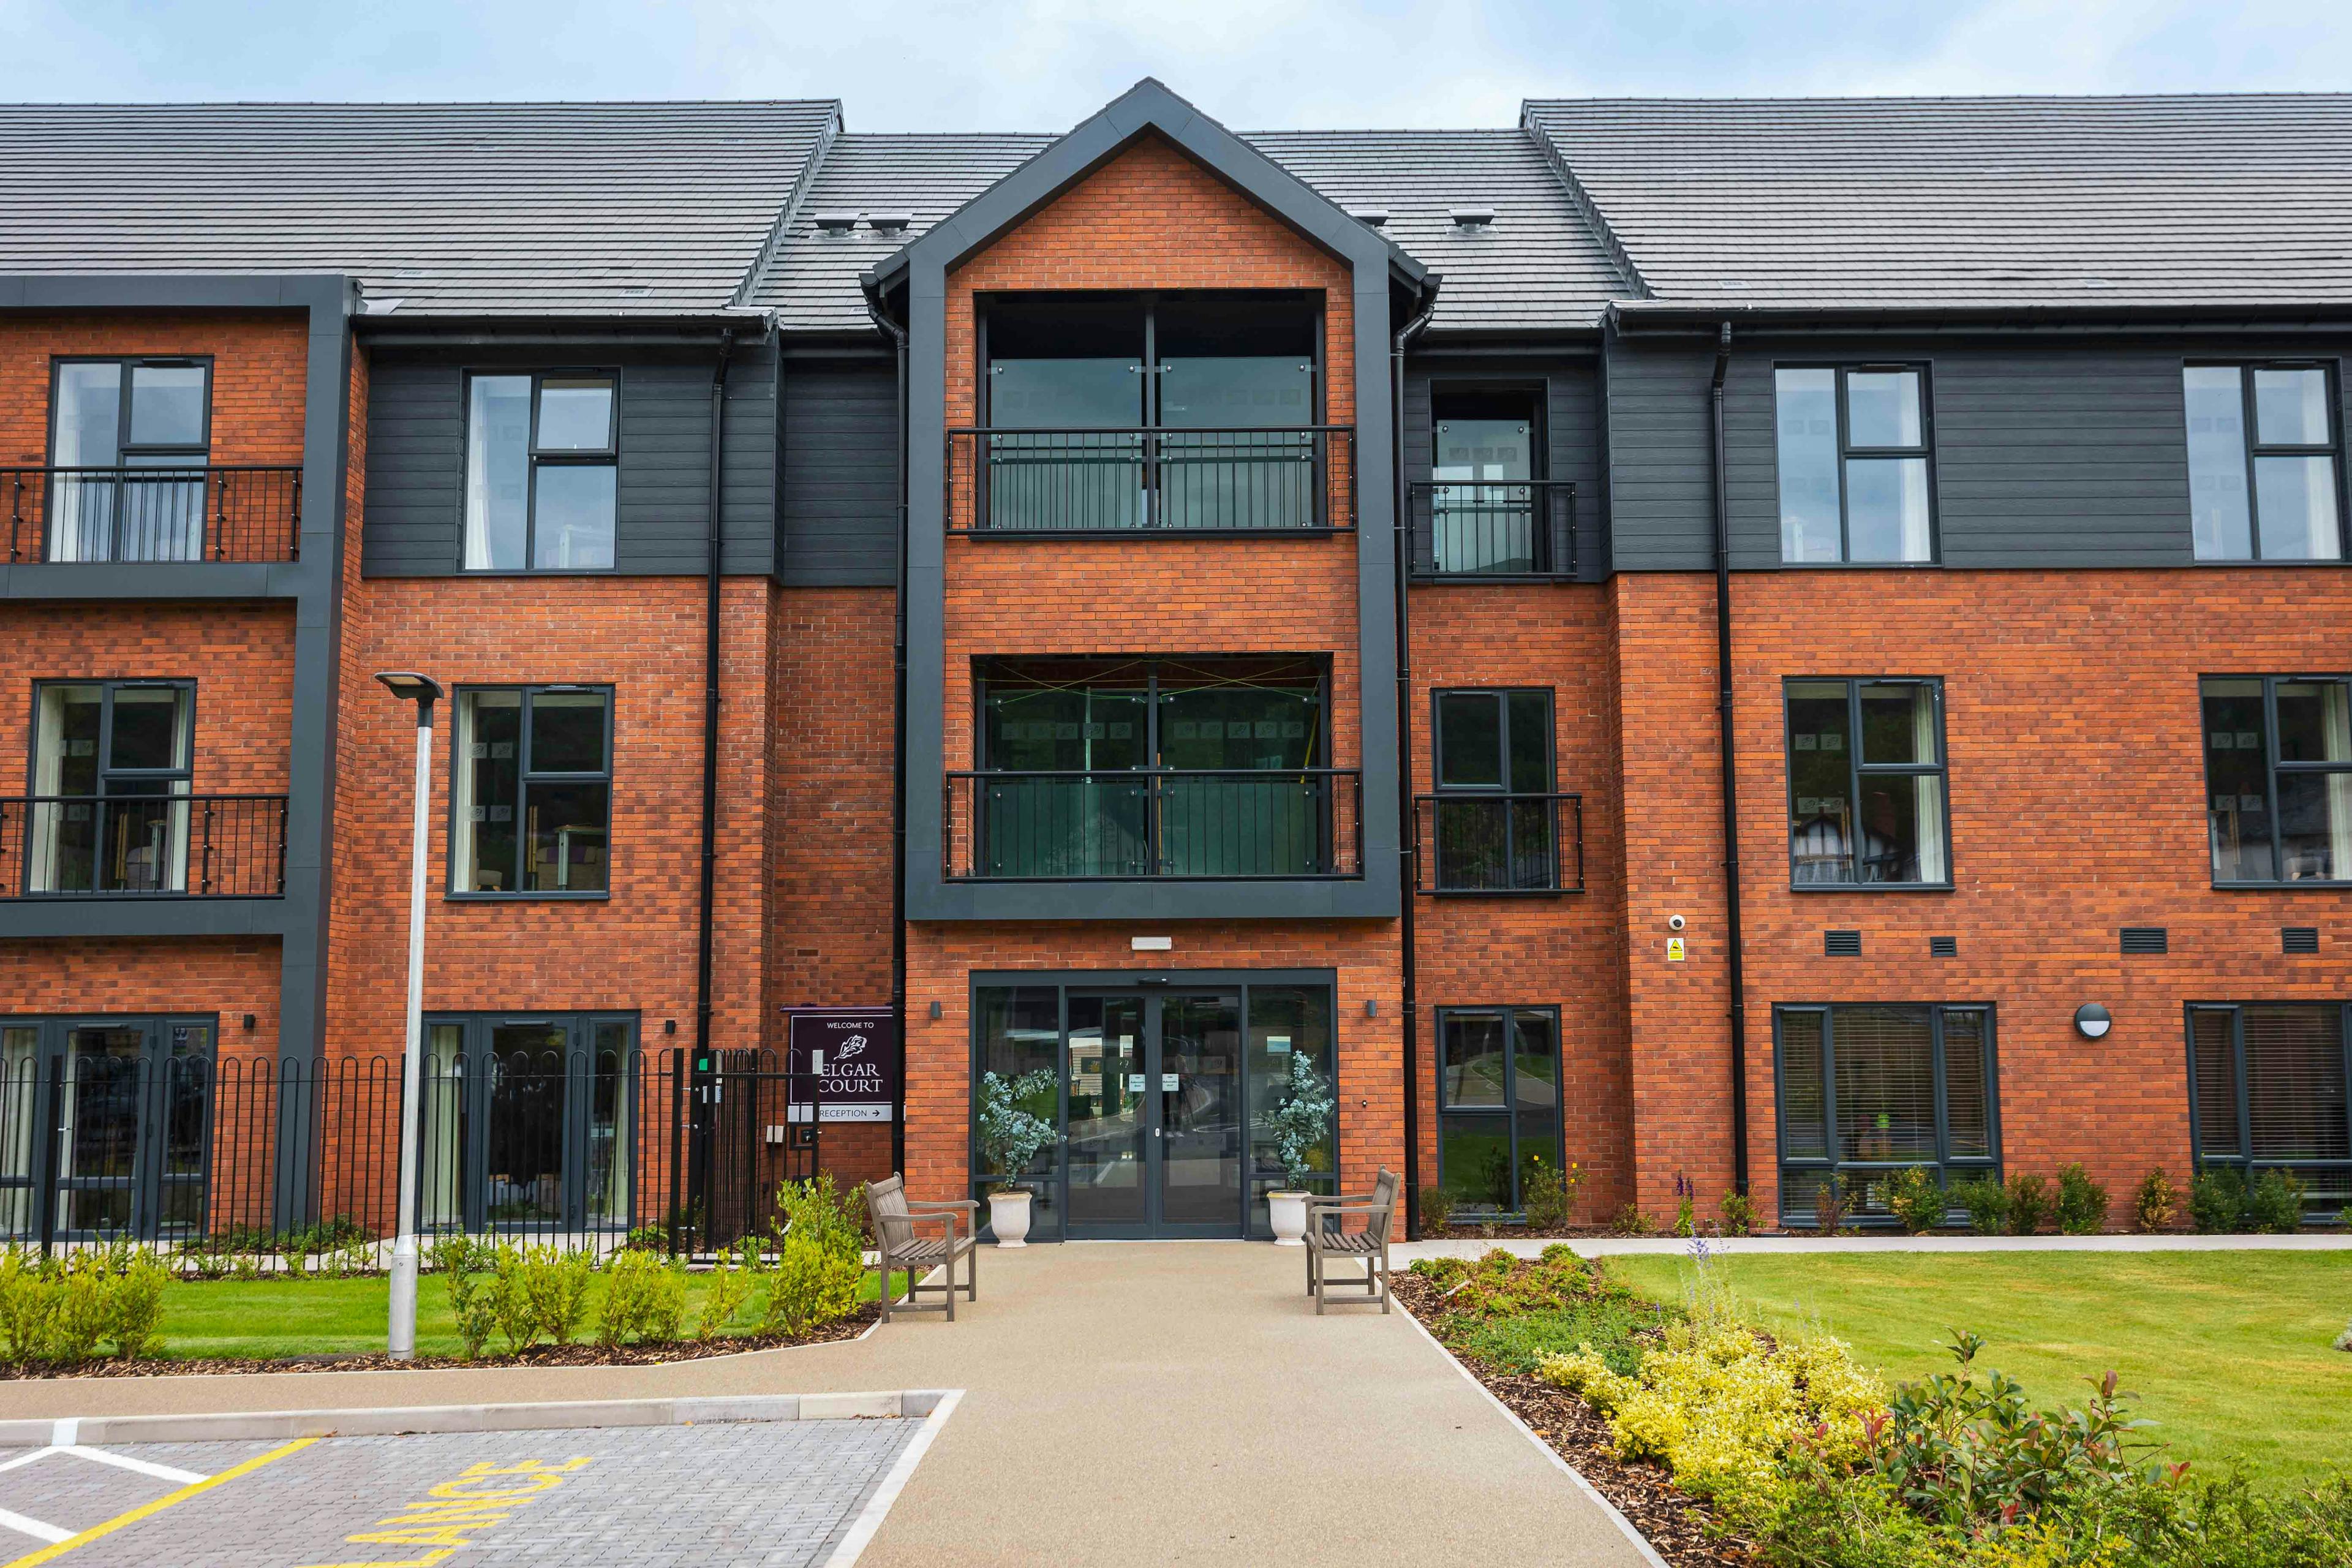 Exterior of Elgar Court Care Home in Malvern, Worcestershire